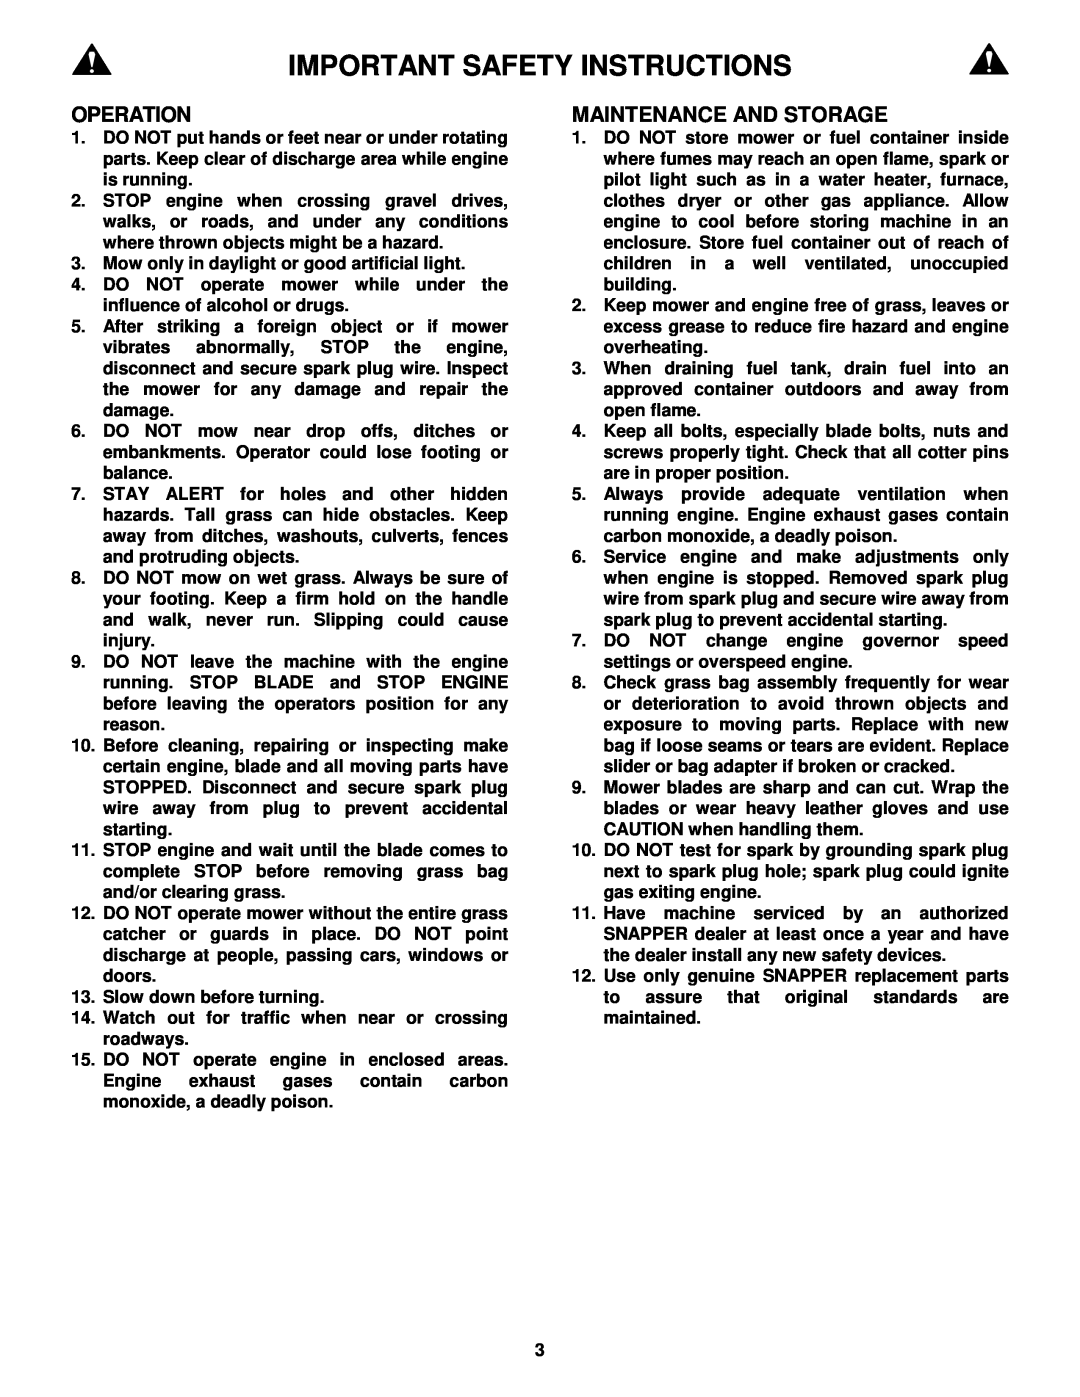 Snapper MRP216015B important safety instructions Important Safety Instructions, Operation, Maintenance And Storage 